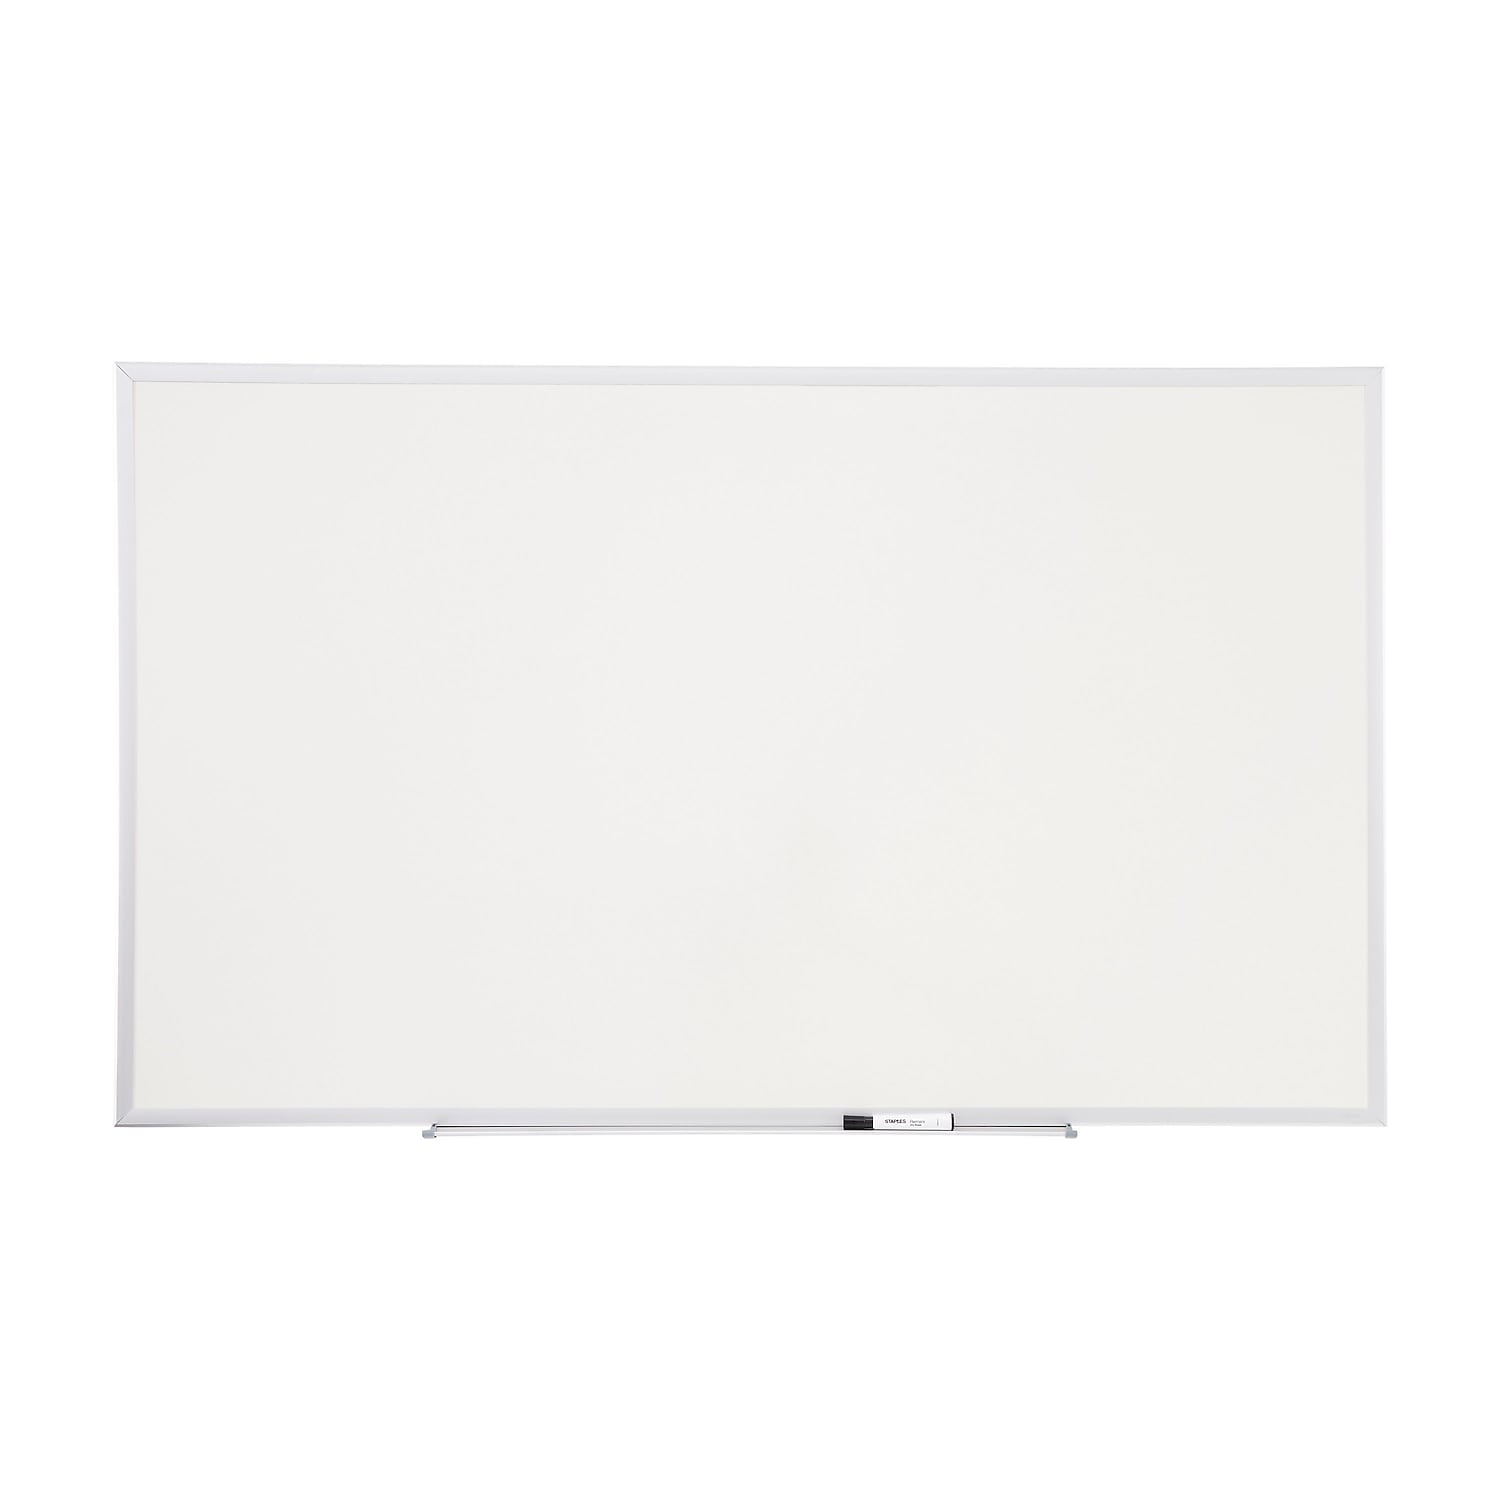 Acrylic Dry Erase Board with Light, 11.8”x7.9” Glow Memo Tablet, Photo  Display Board, Clear Message Board with 6 Colored Markers for Home, Office,  School 